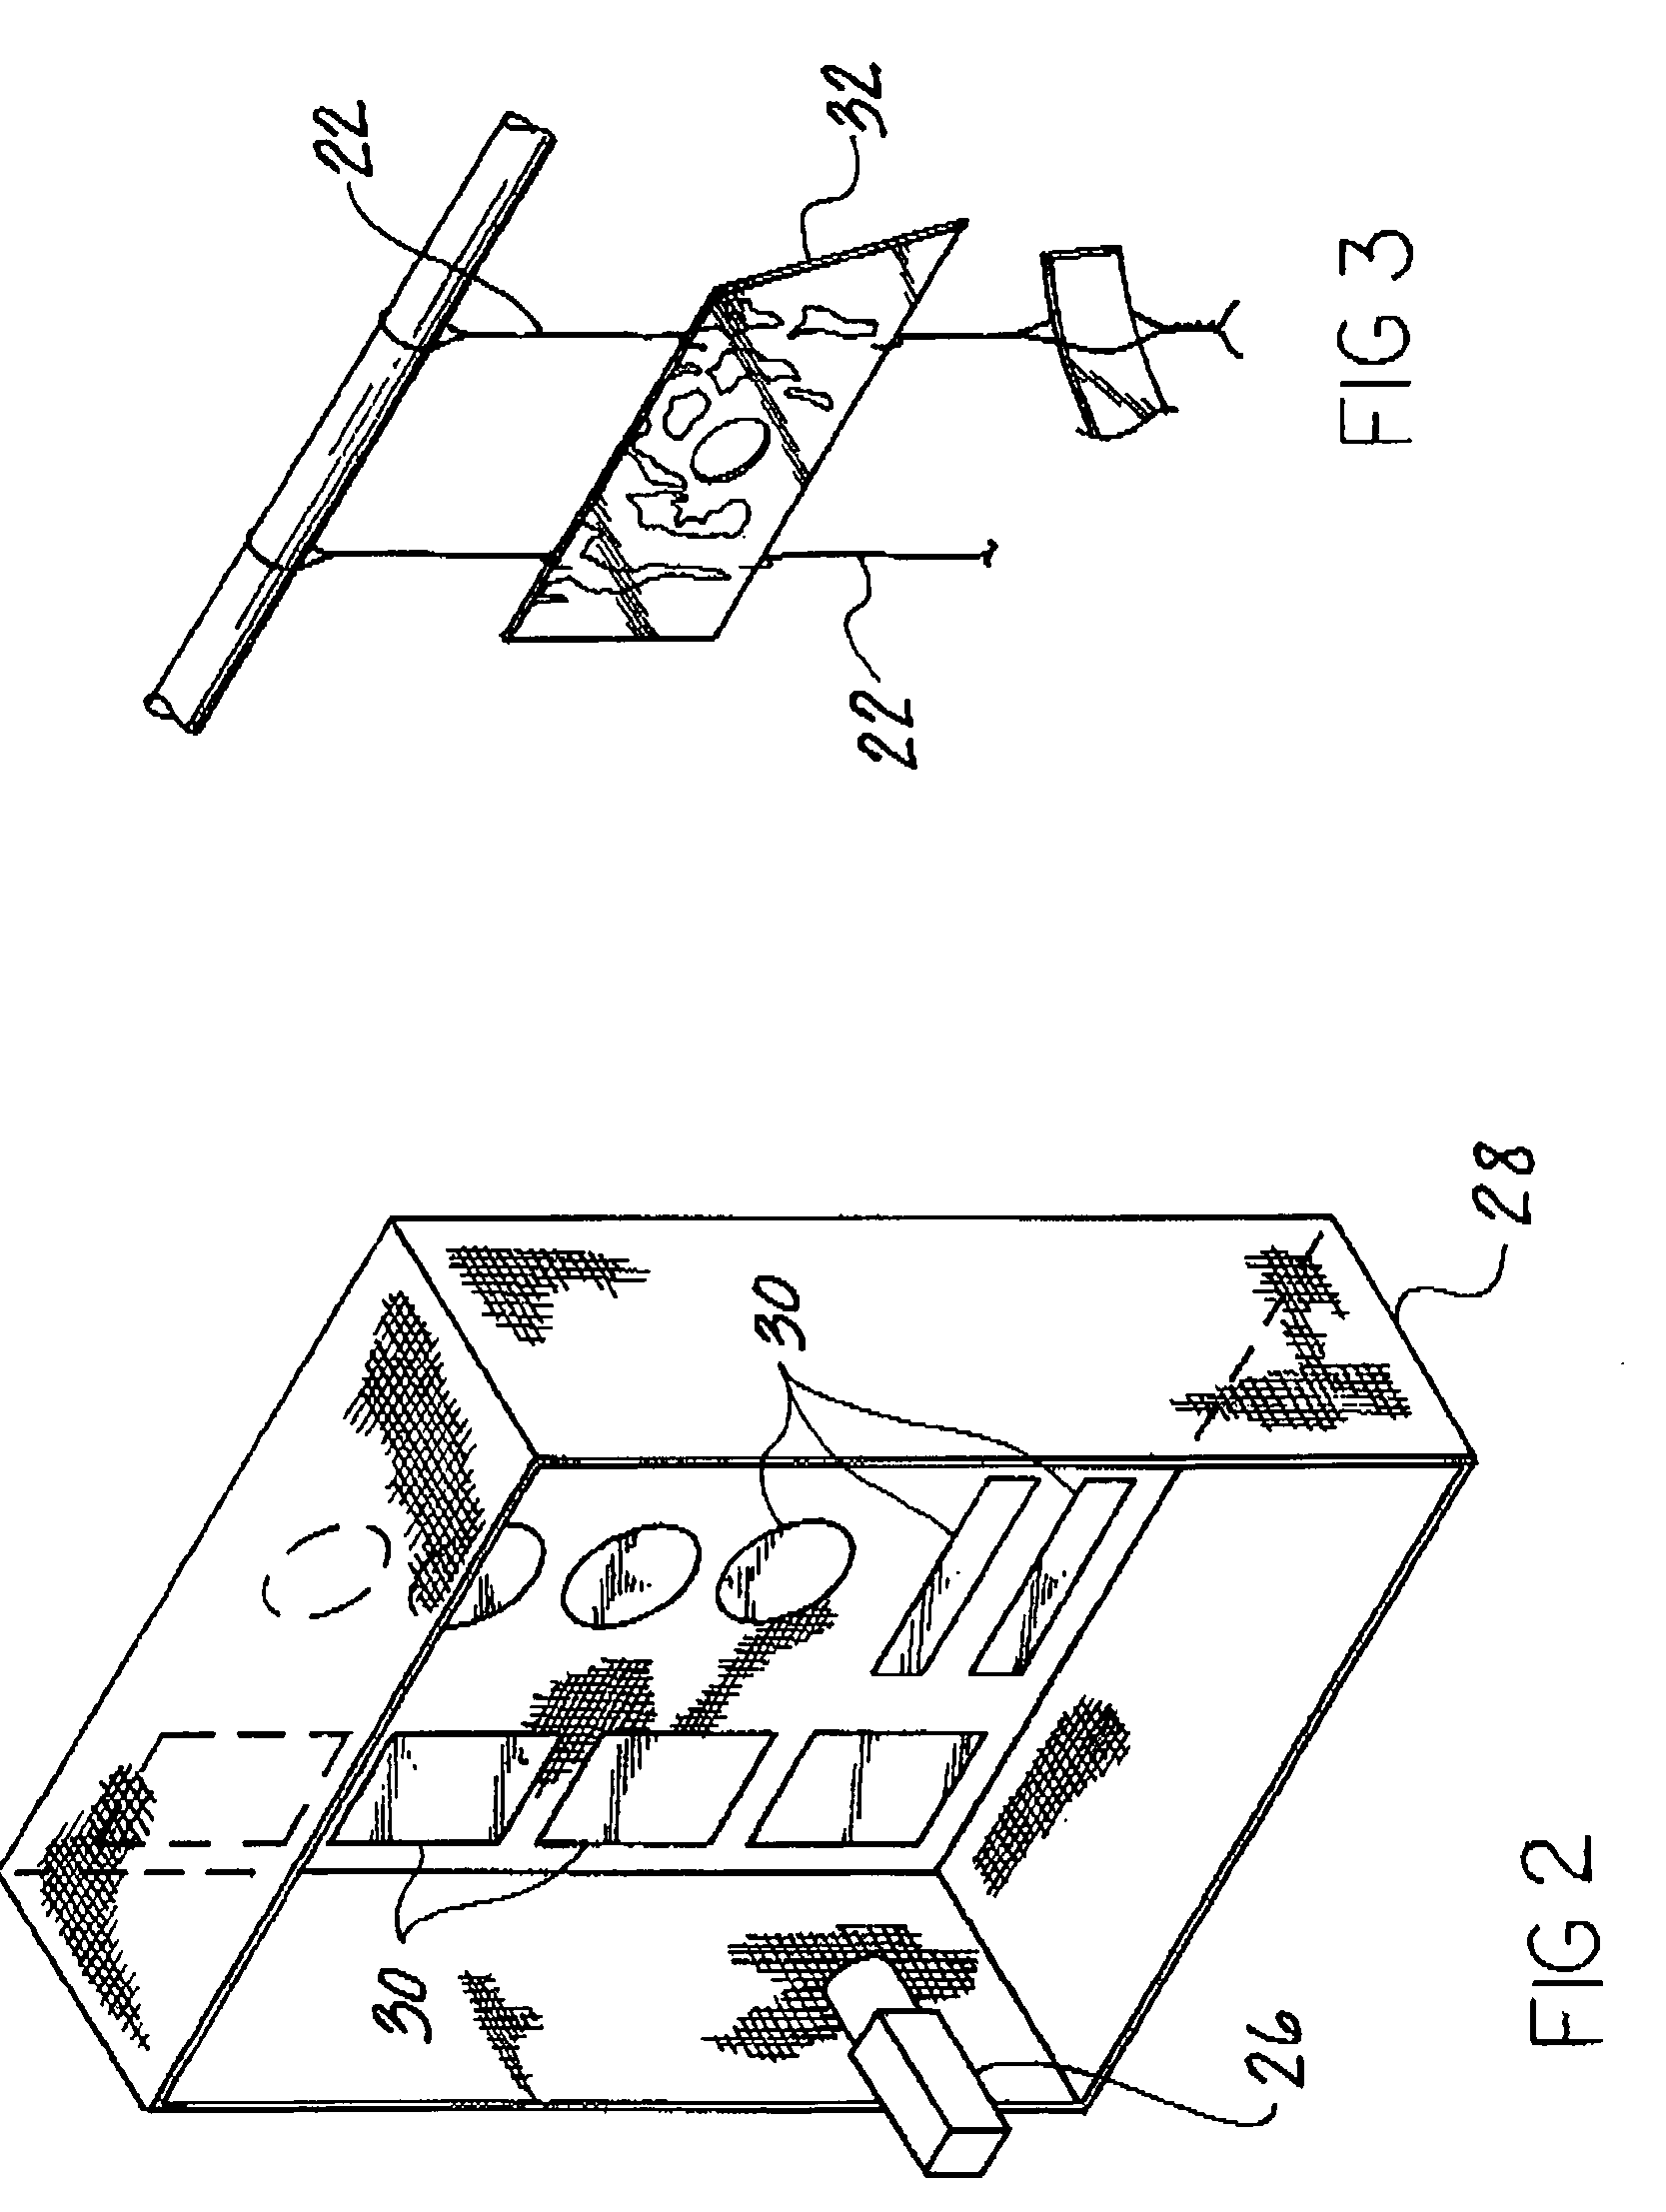 Surface contamination detection method and apparatus